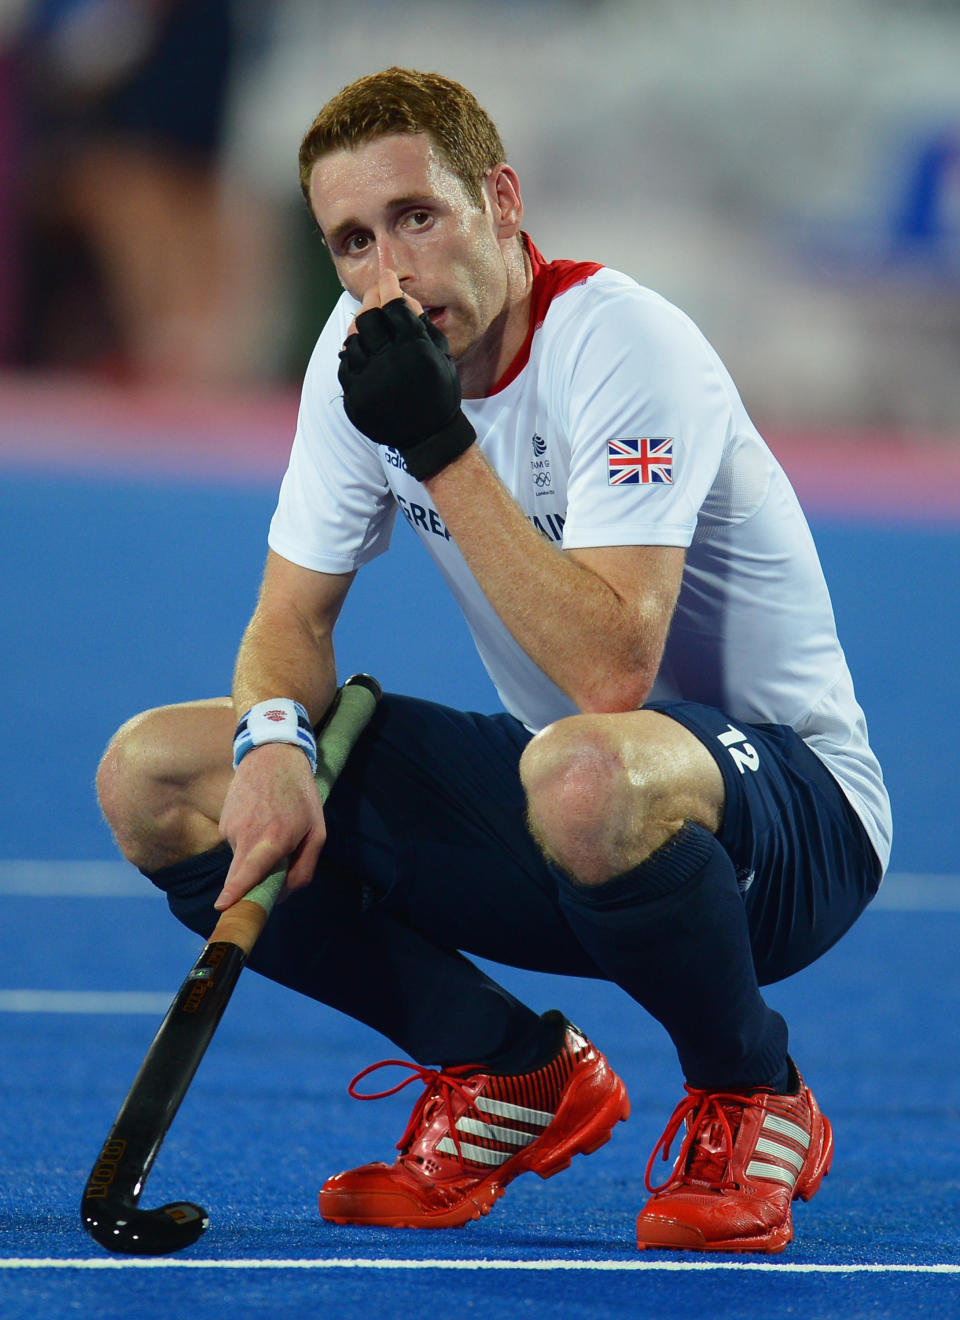 LONDON, ENGLAND - AUGUST 09: Jonathan Clarke of Great Britain looks dejected at the end of the Men's Hockey Semi Final match between Netherlands and Great Britain on Day 13 of the London 2012 Olympic Games at Riverbank Arena Hockey Centre on August 9, 2012 in London, England. (Photo by Lars Baron/Getty Images)